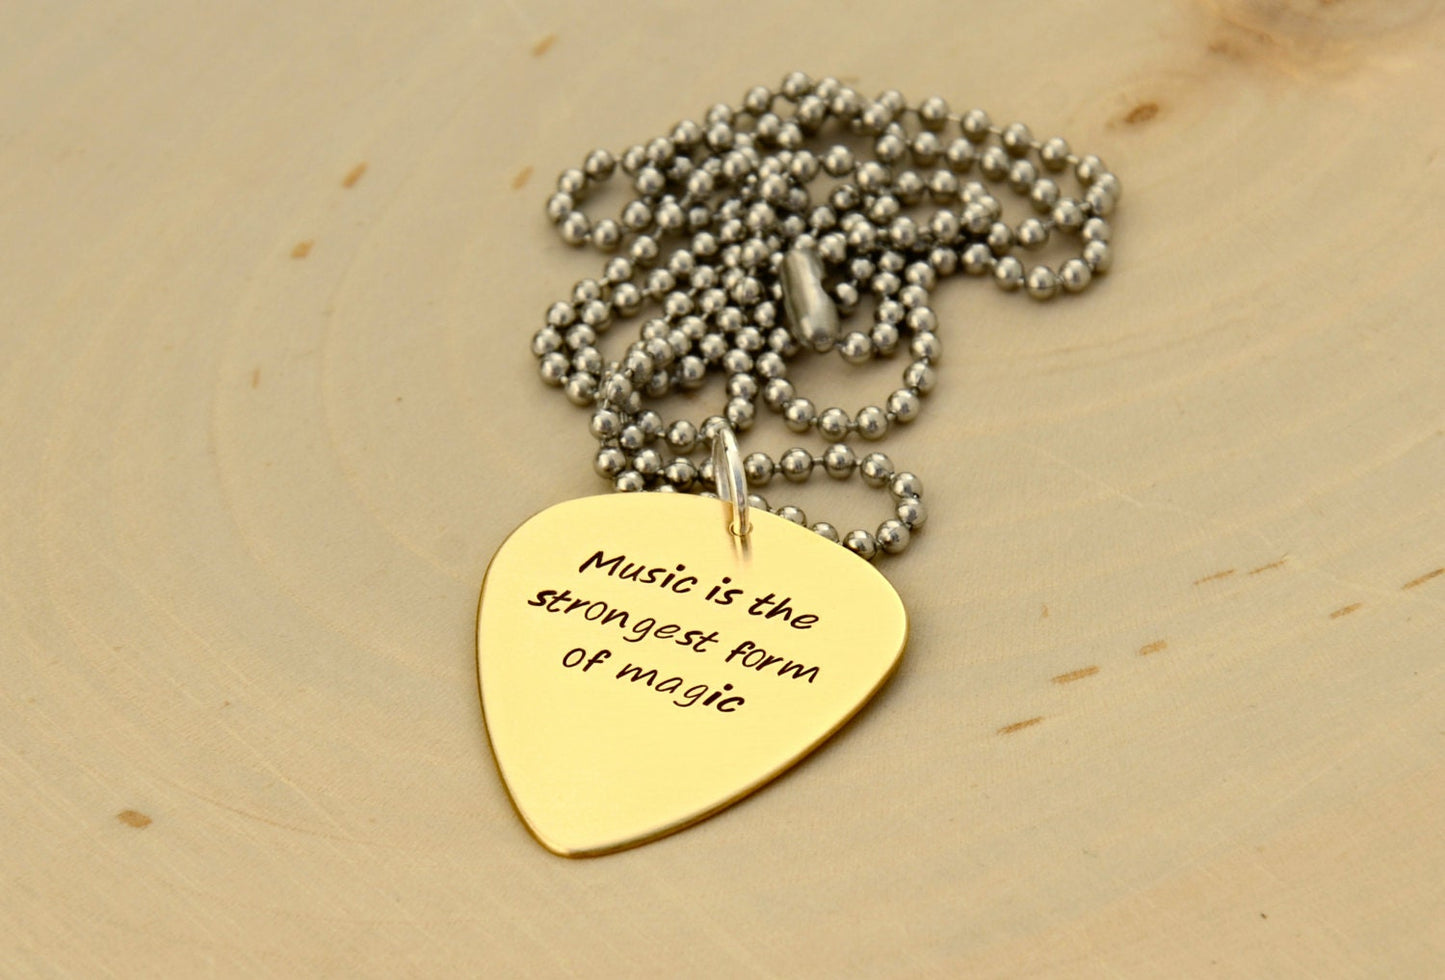 Bronze guitar pick necklace to engrave